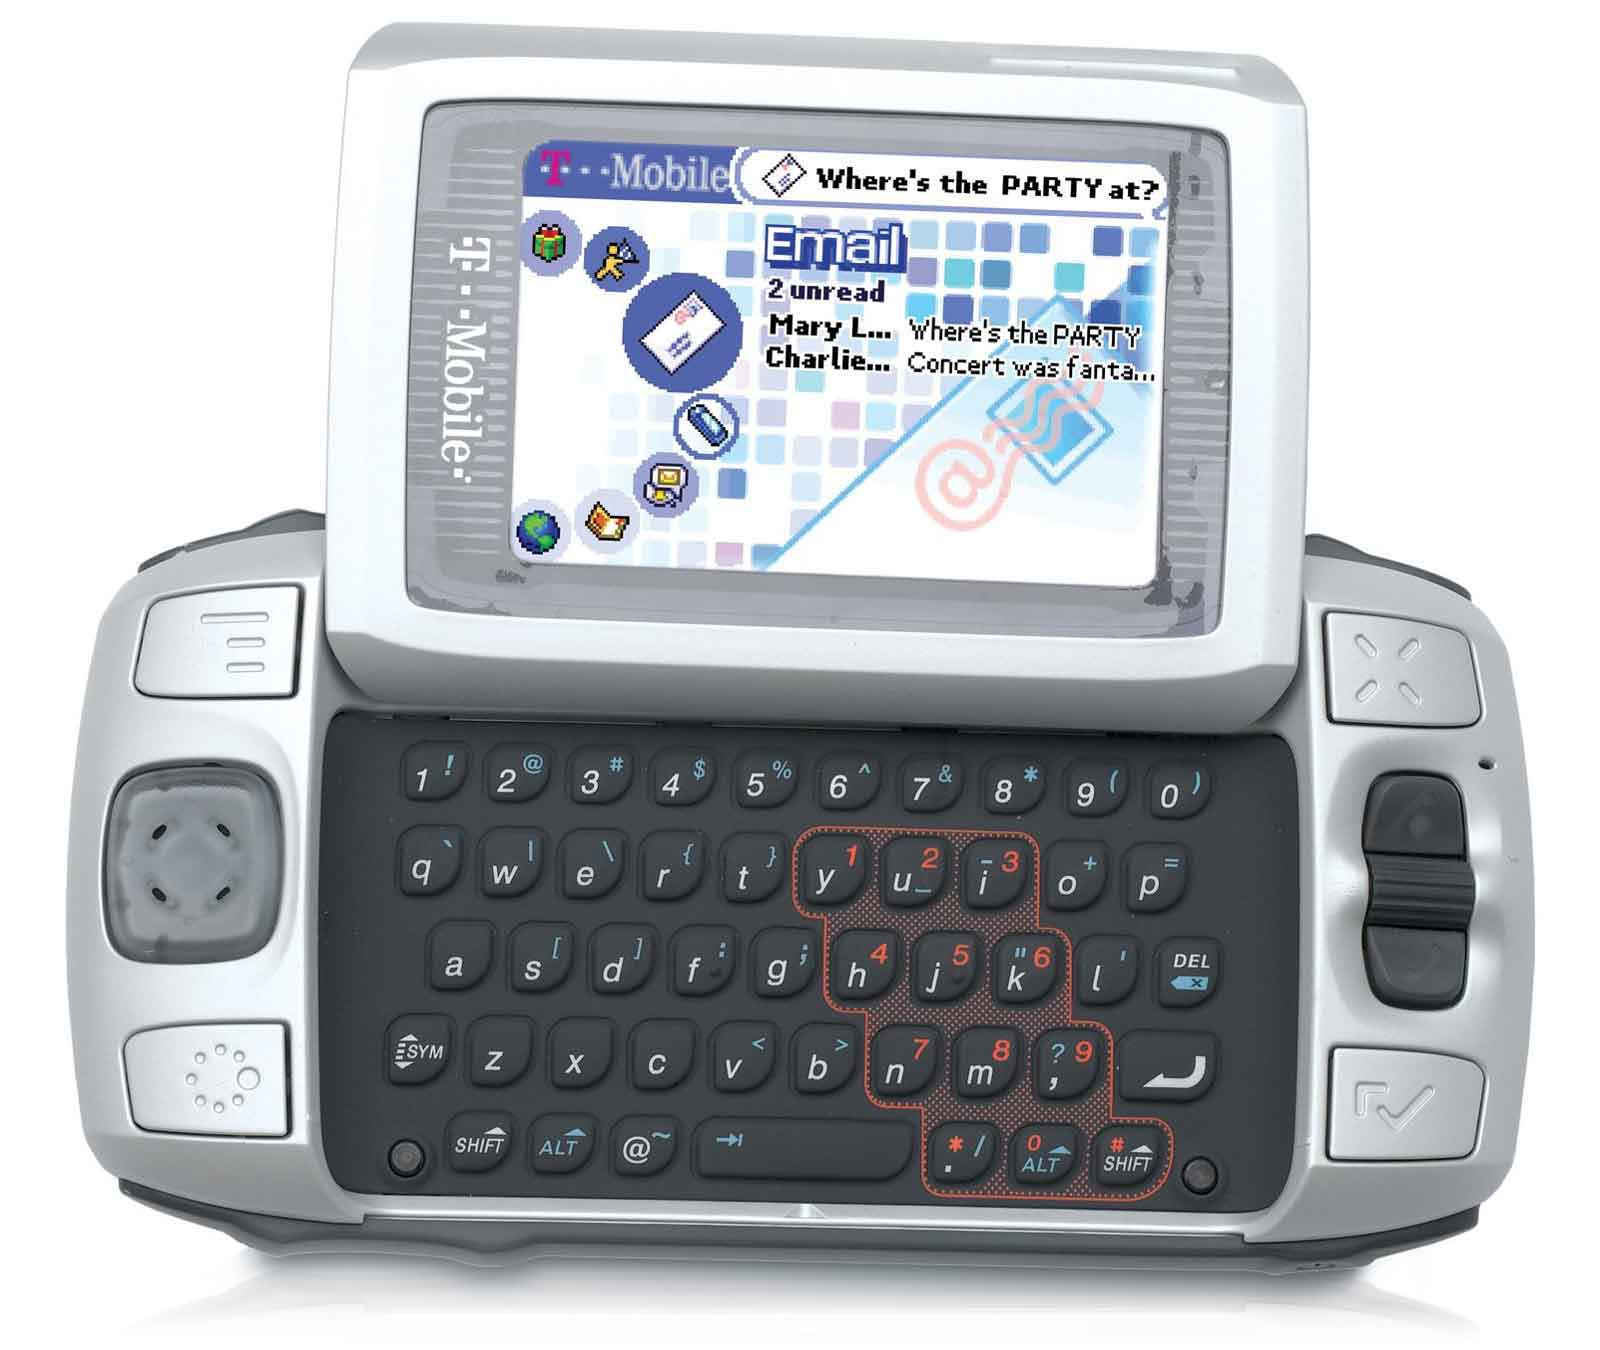 Amazon Is Now Selling The T-Mobile Sidekick II for Only $25 (2004)